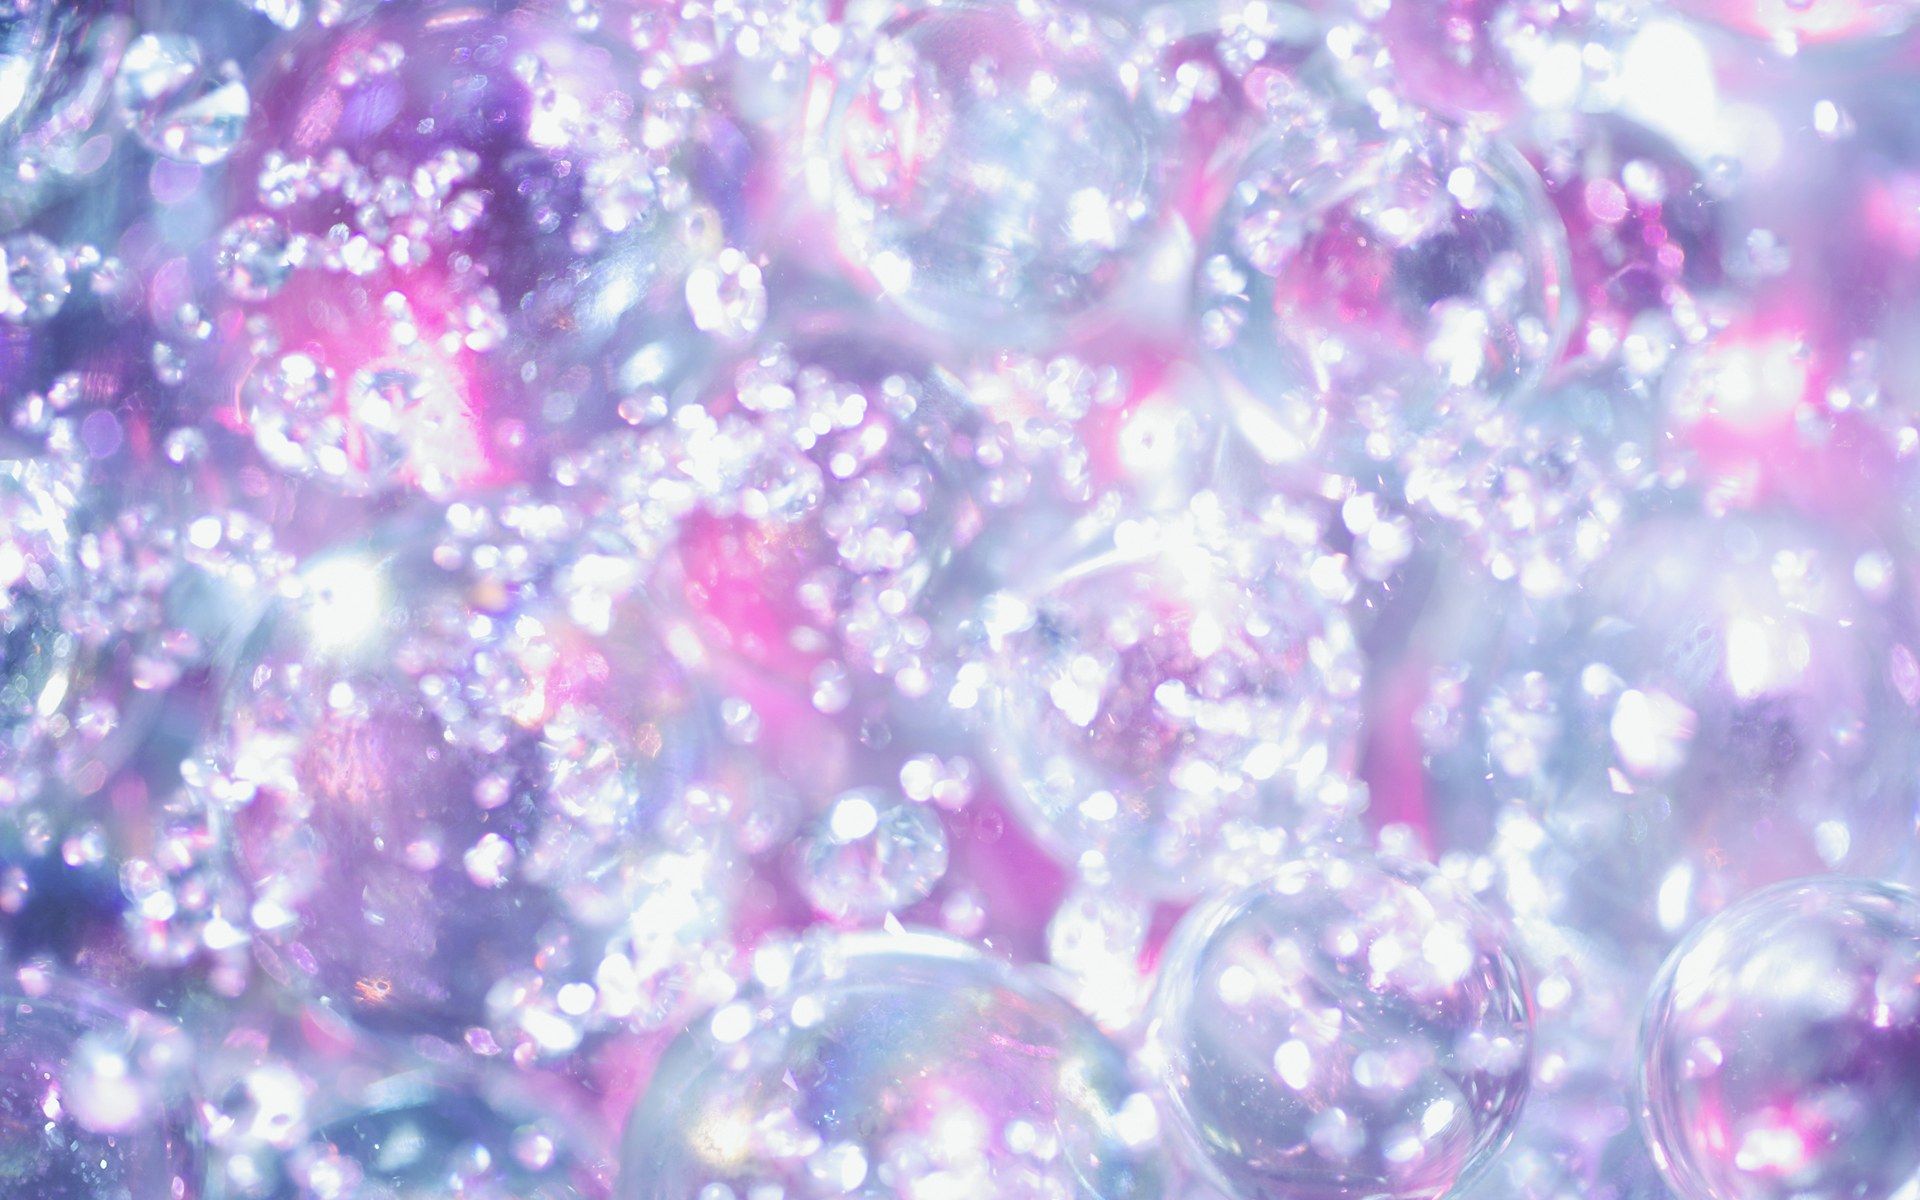 Sparkling and Romantic Background HK018 350A Wallpaper